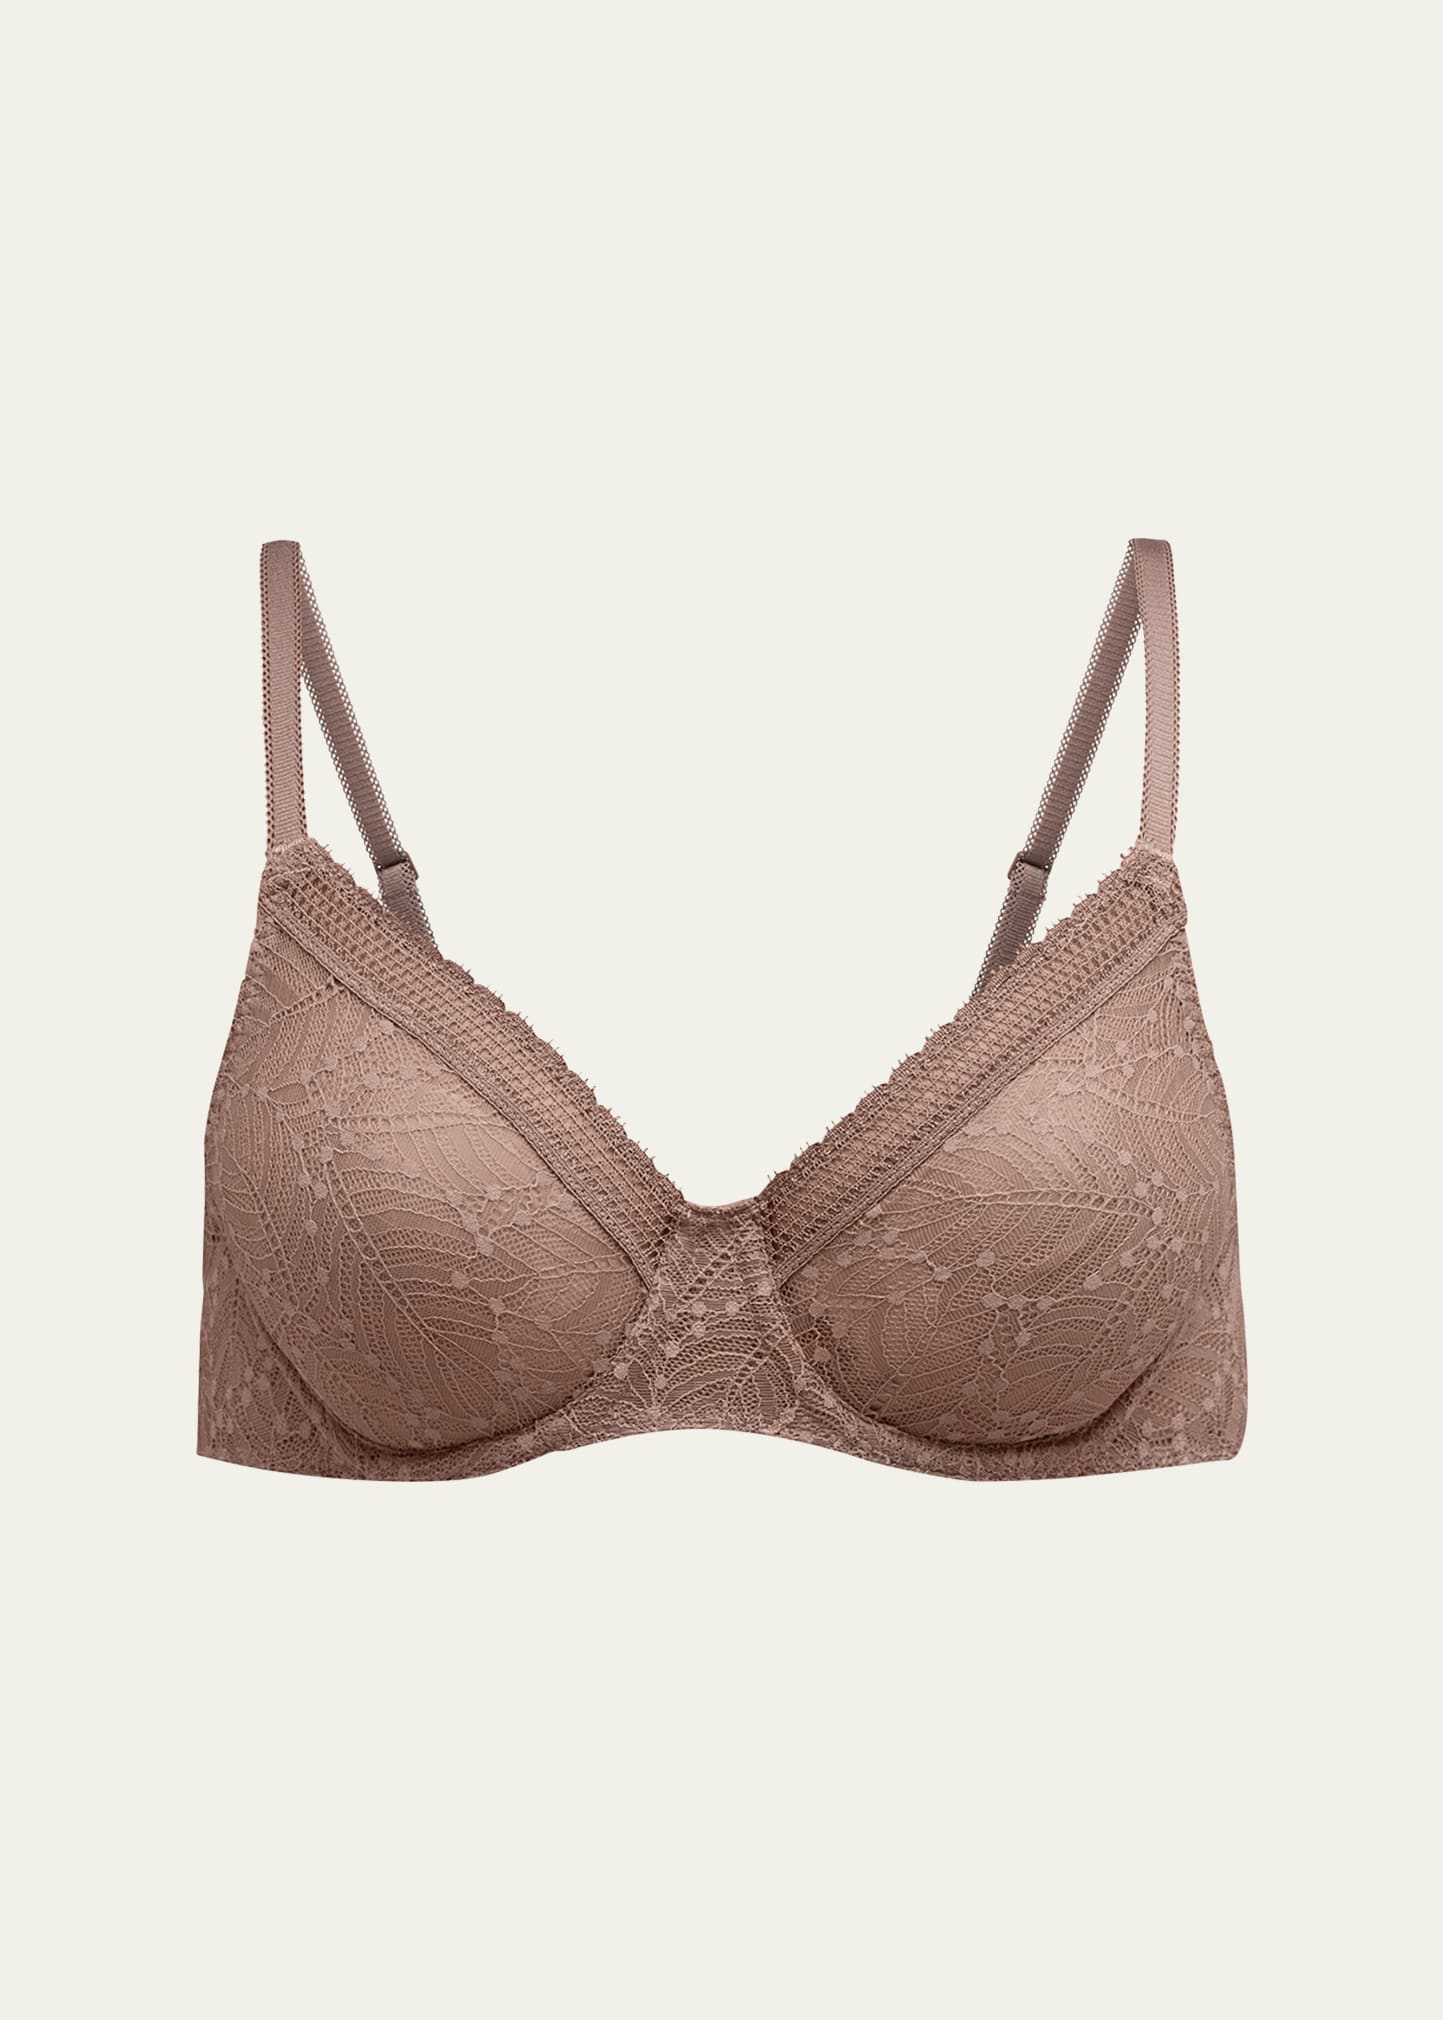 Comete Molded Full Cup Convertible Lace Bra